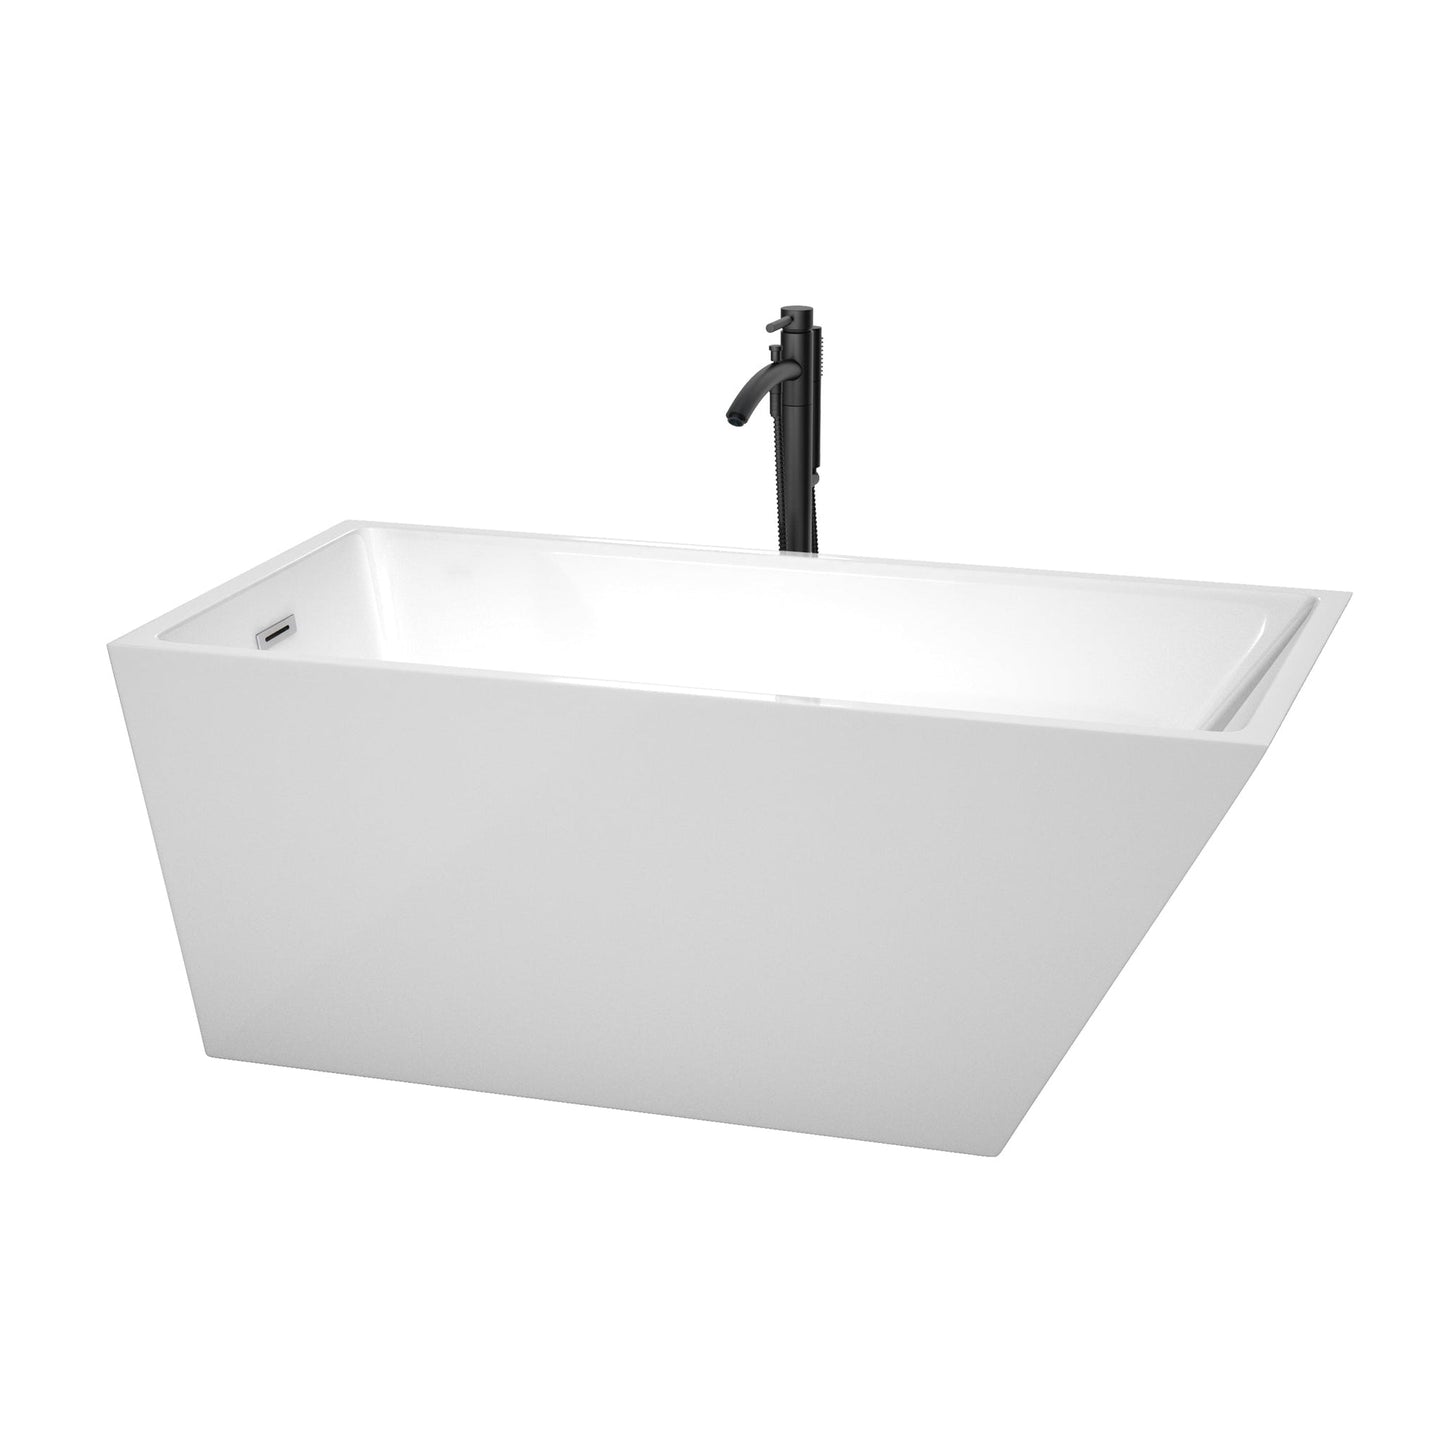 Wyndham Collection Hannah 59" Freestanding Bathtub in White With Polished Chrome Trim and Floor Mounted Faucet in Matte Black